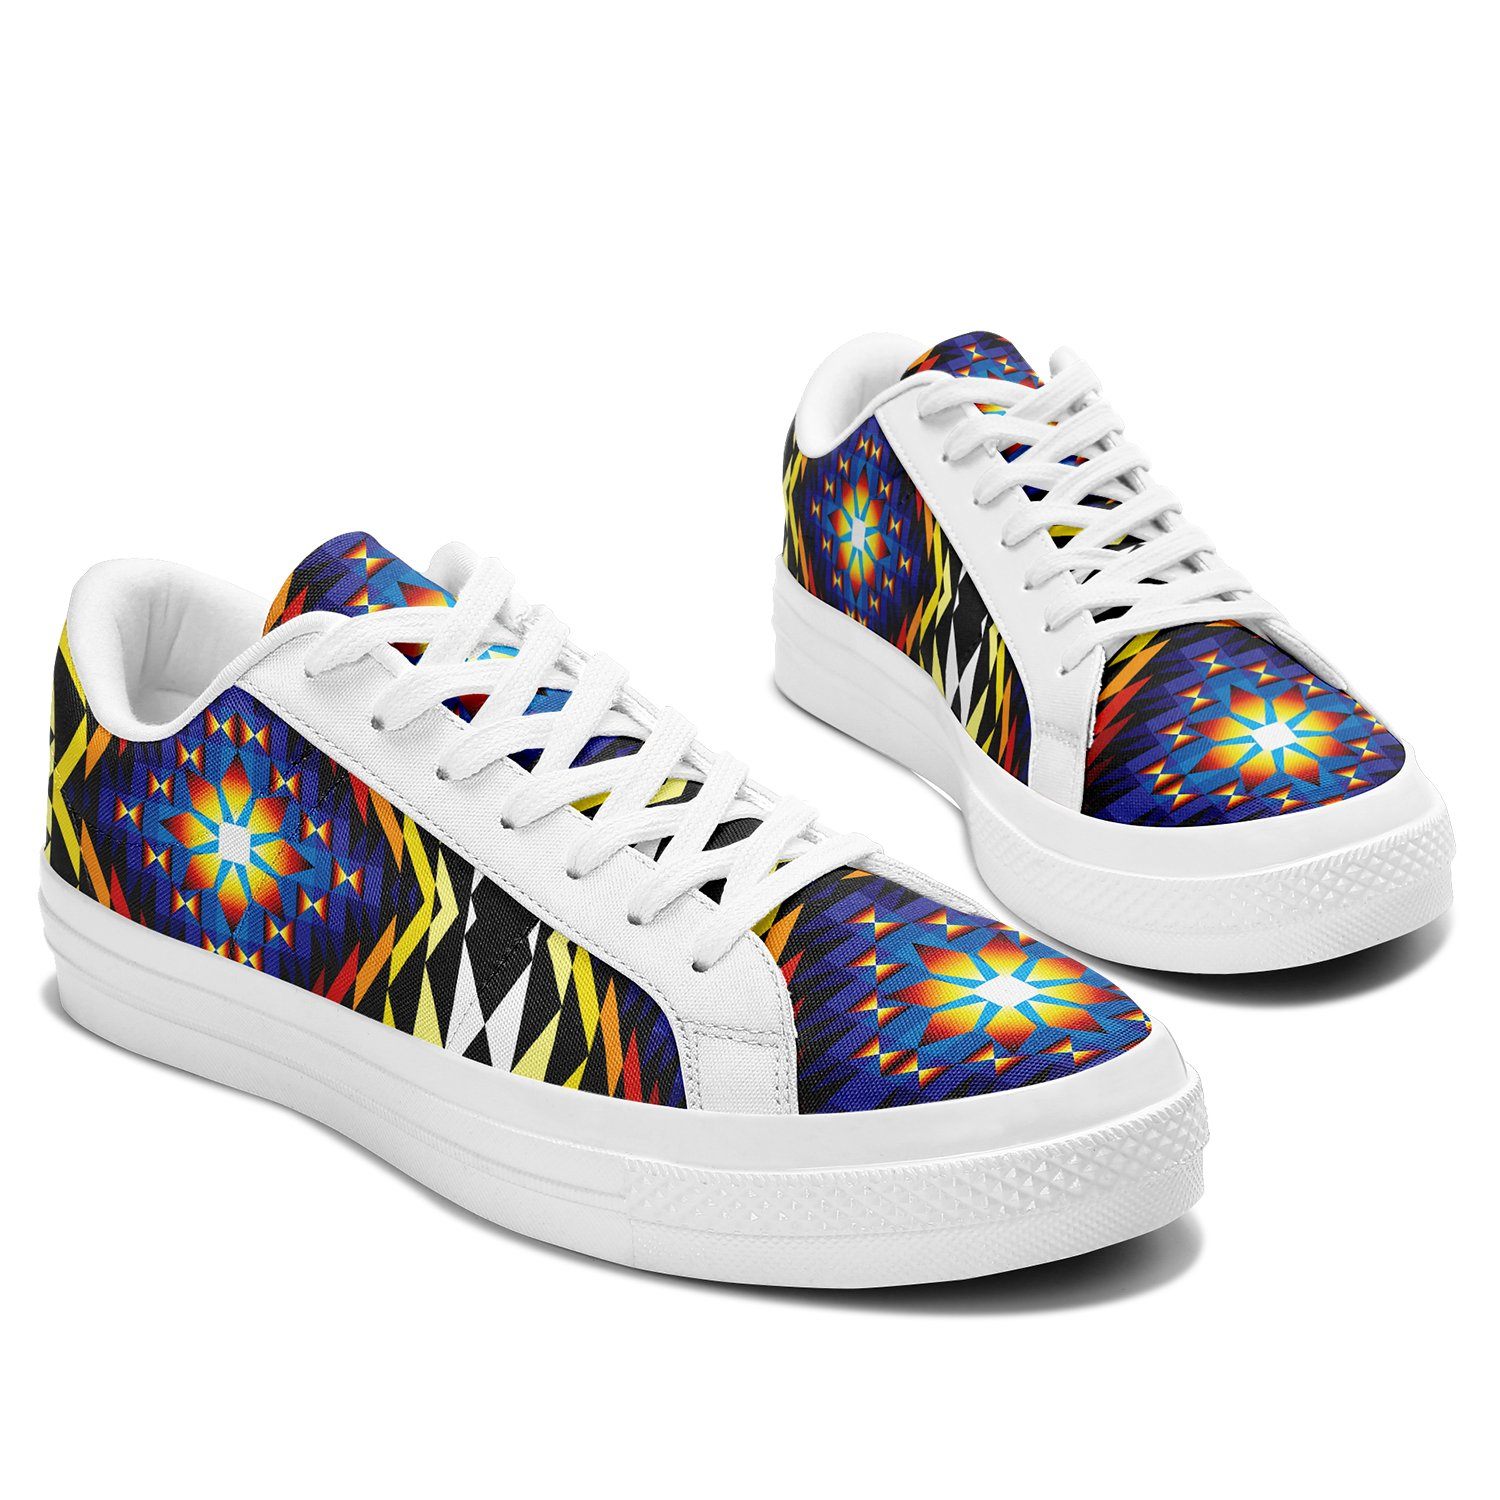 Sunset Blanket Aapisi Low Top Canvas Shoes White Sole 49 Dzine 